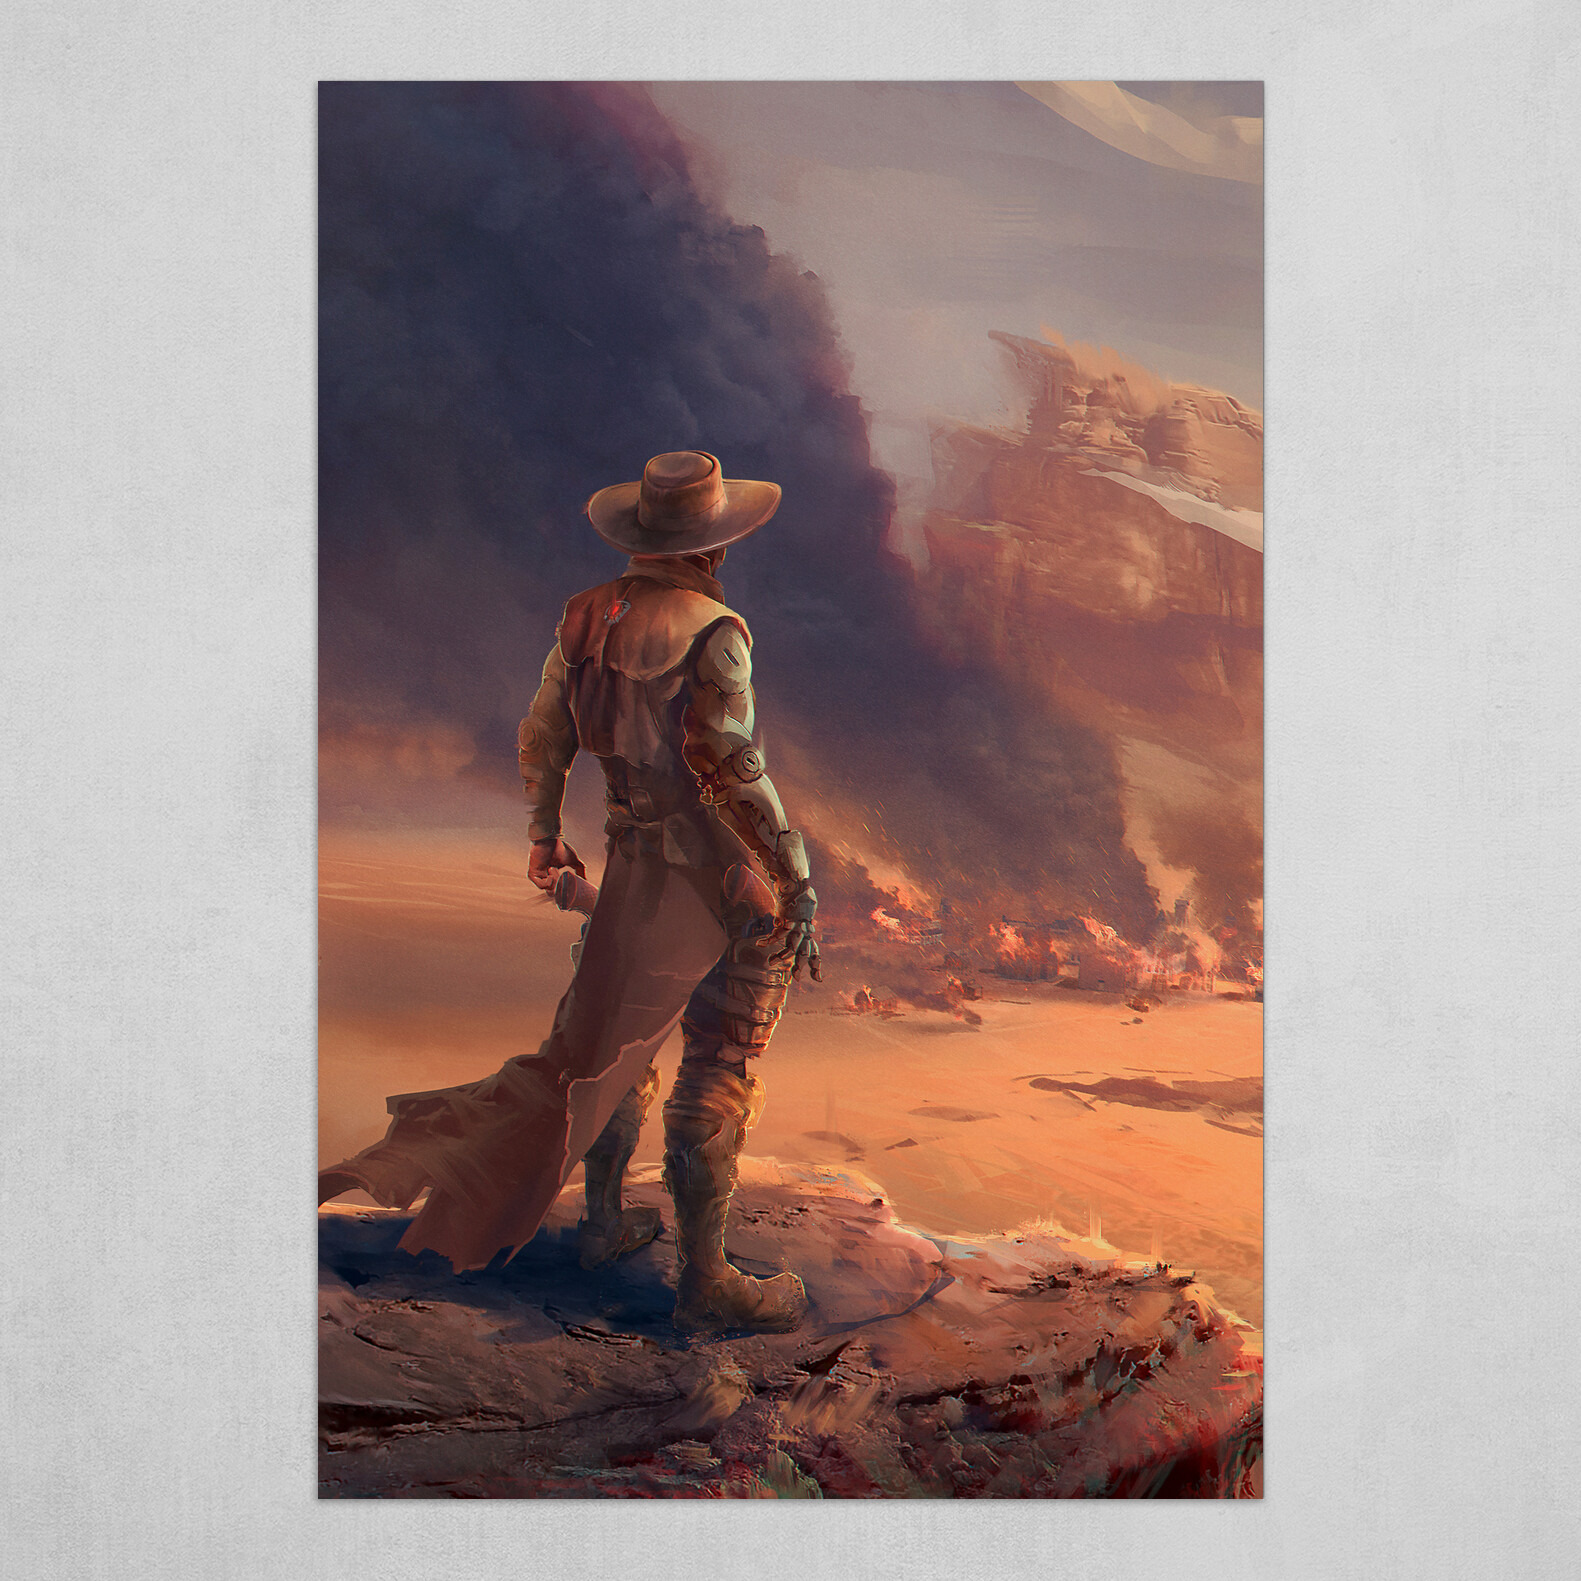 The Sheriff 5: A post-apocalyptic sci-fi western